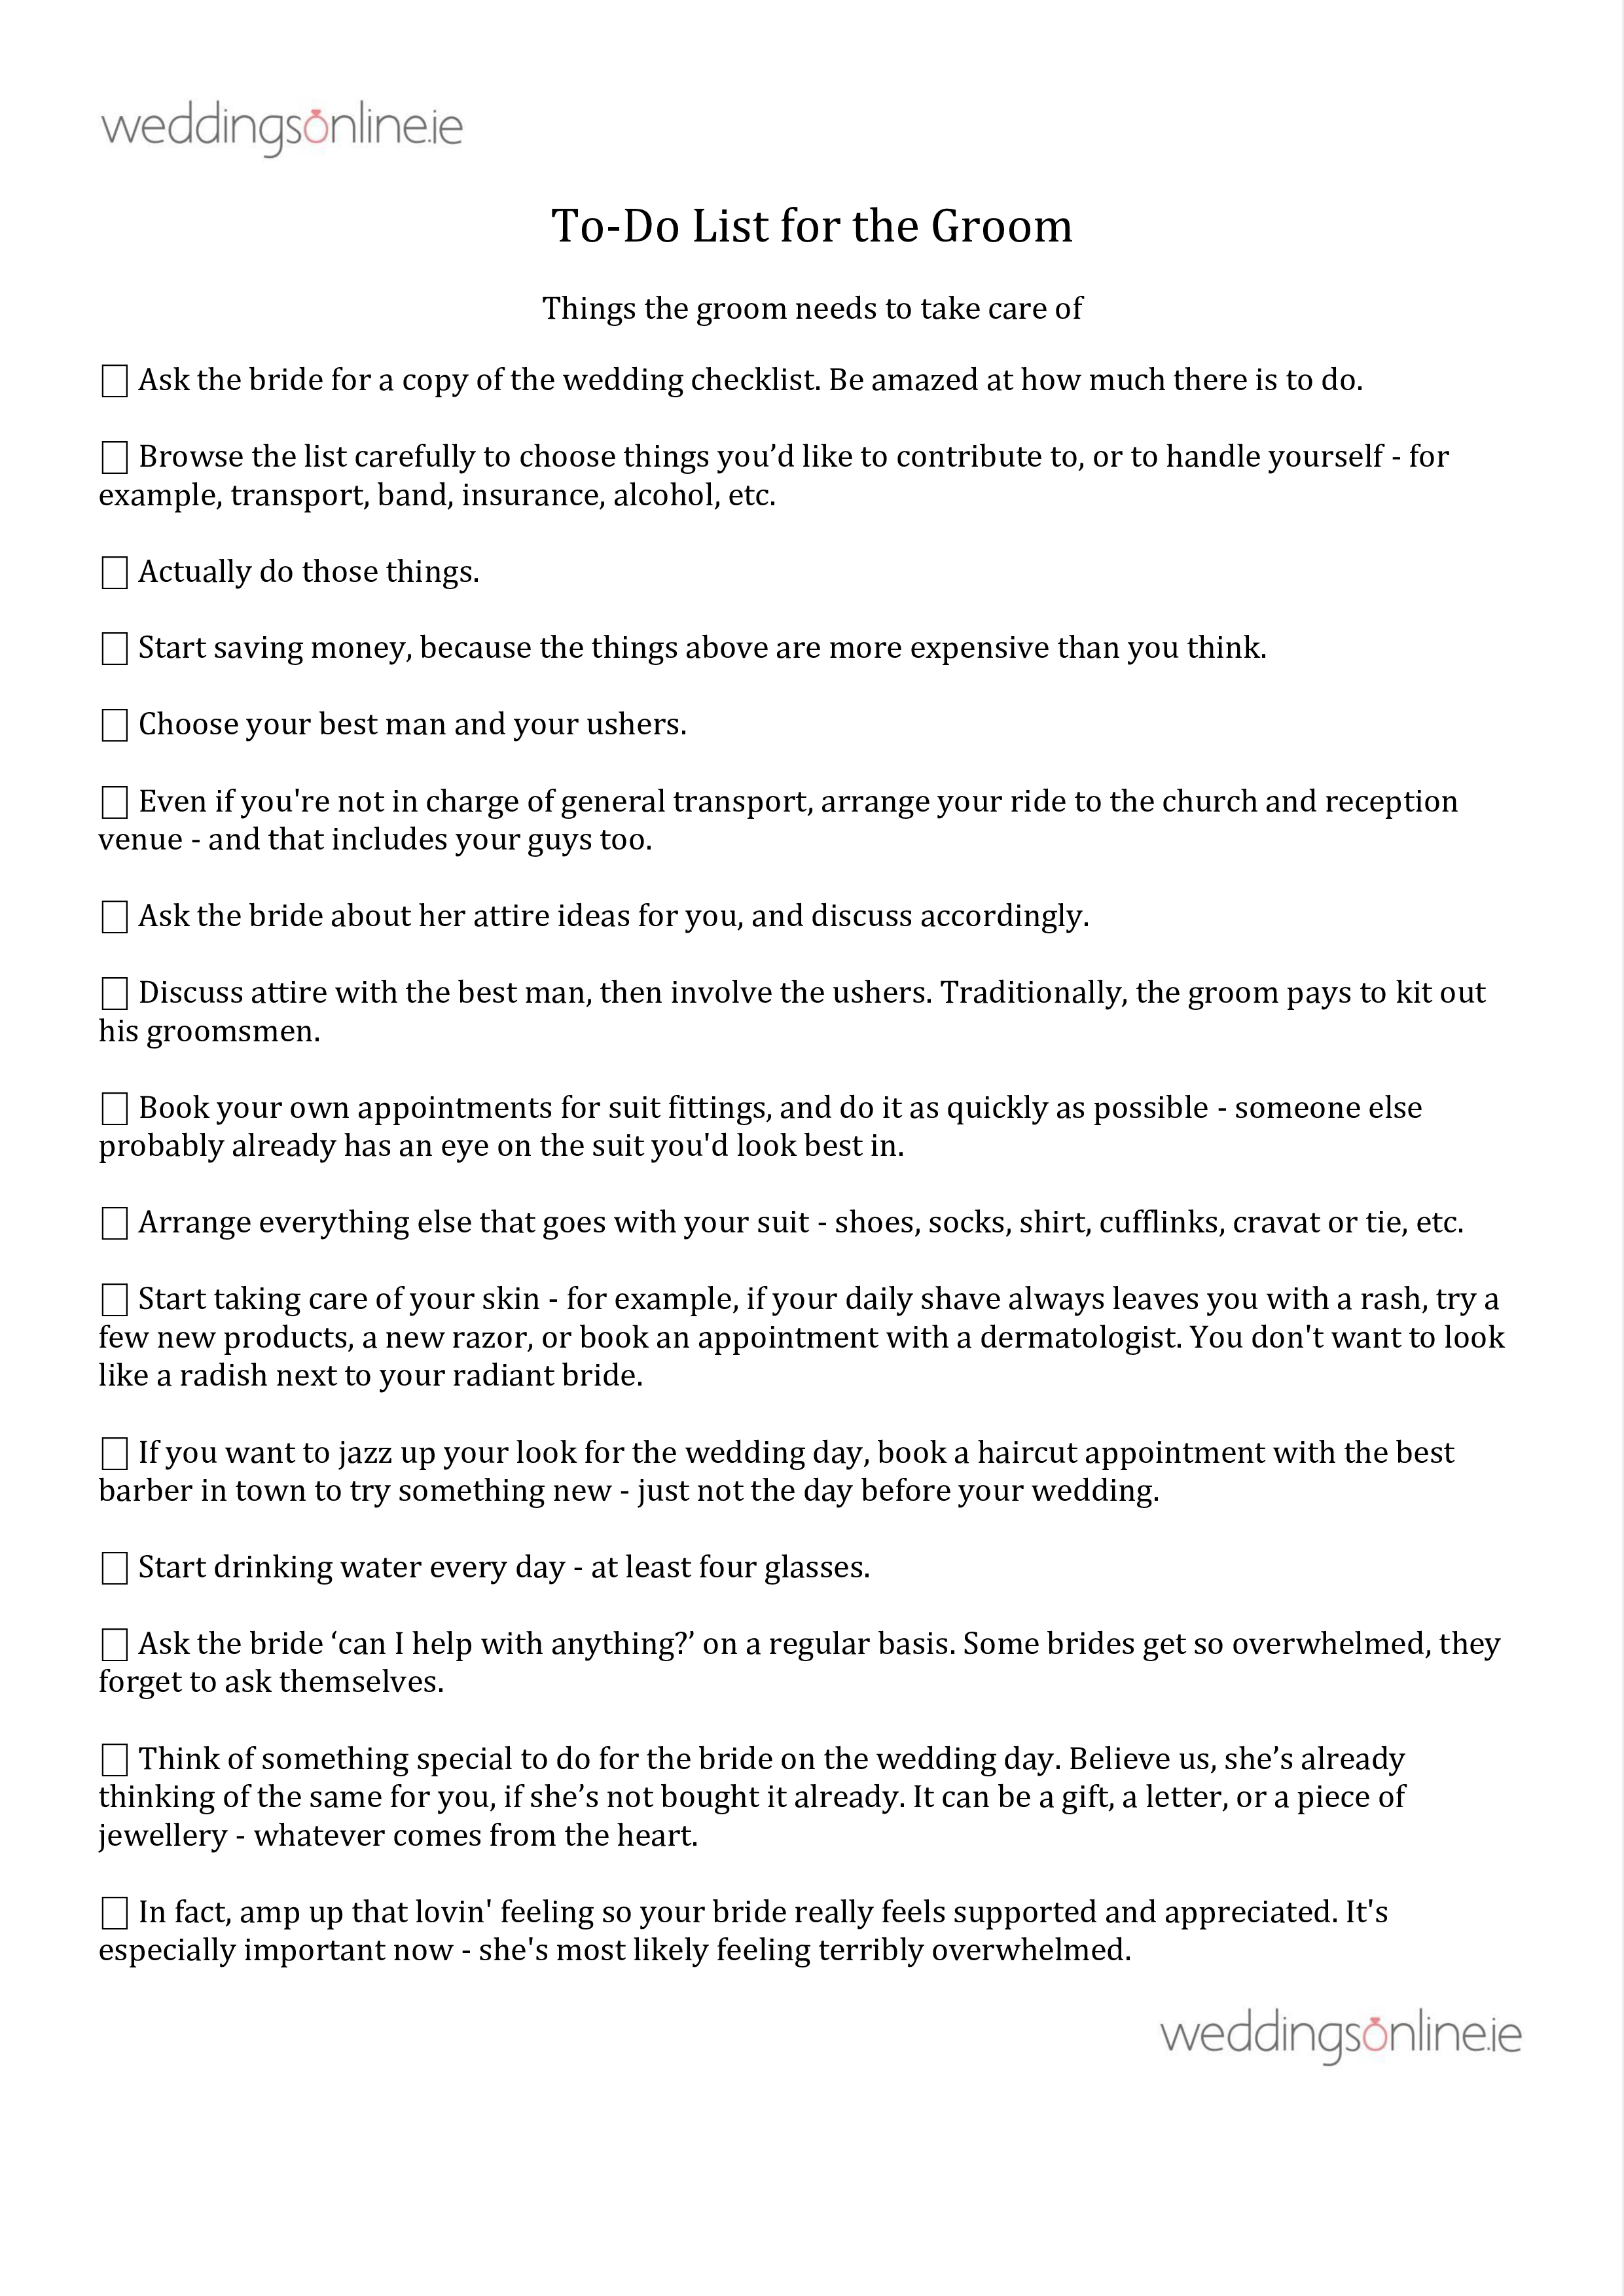 groom things to do list template